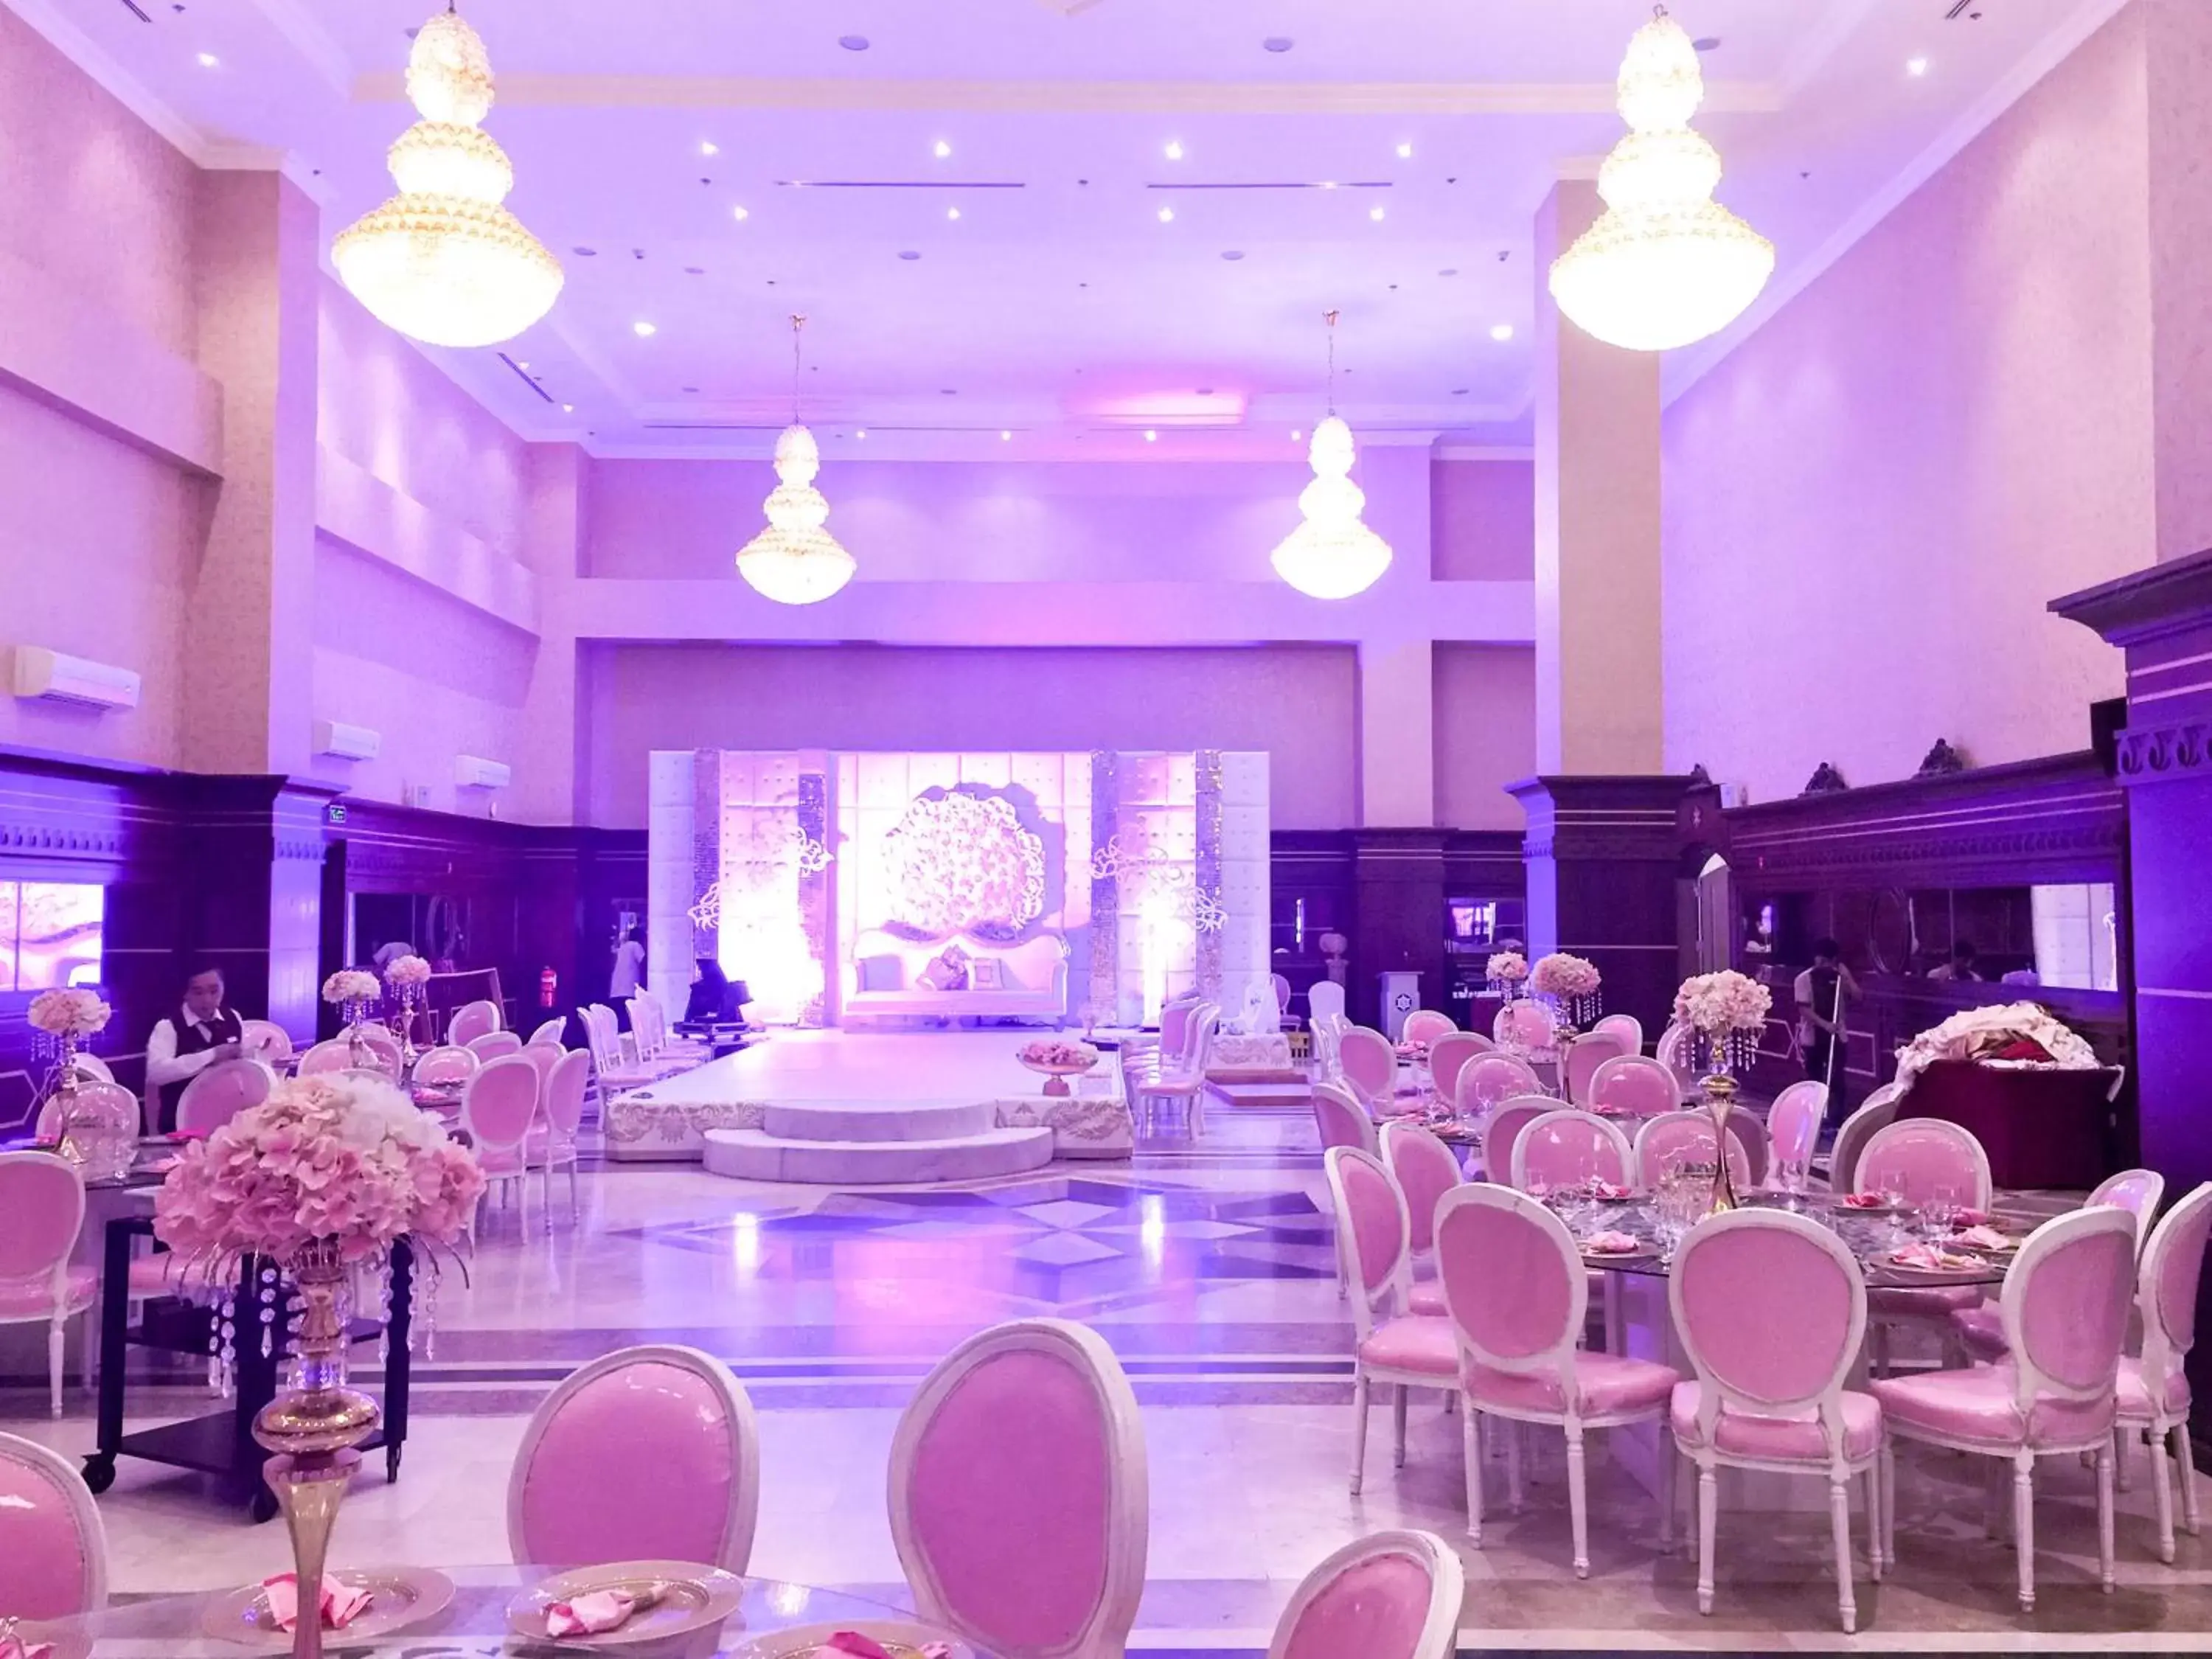 Banquet/Function facilities, Banquet Facilities in Sapphire Plaza Hotel